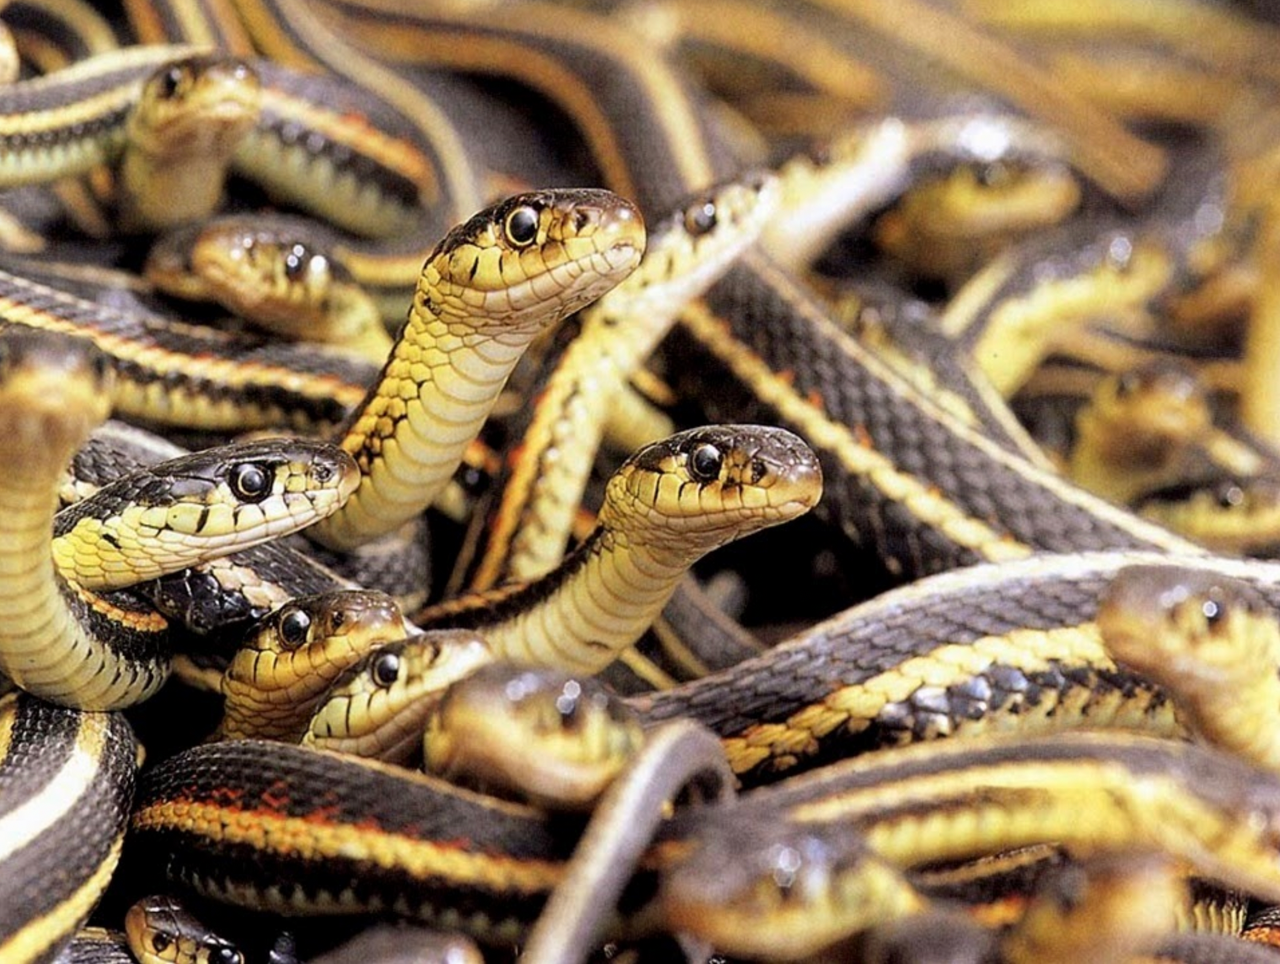 Among the most successful reptiles in North America, garter snakes thrive from the tropics to the edge of the Arctic.